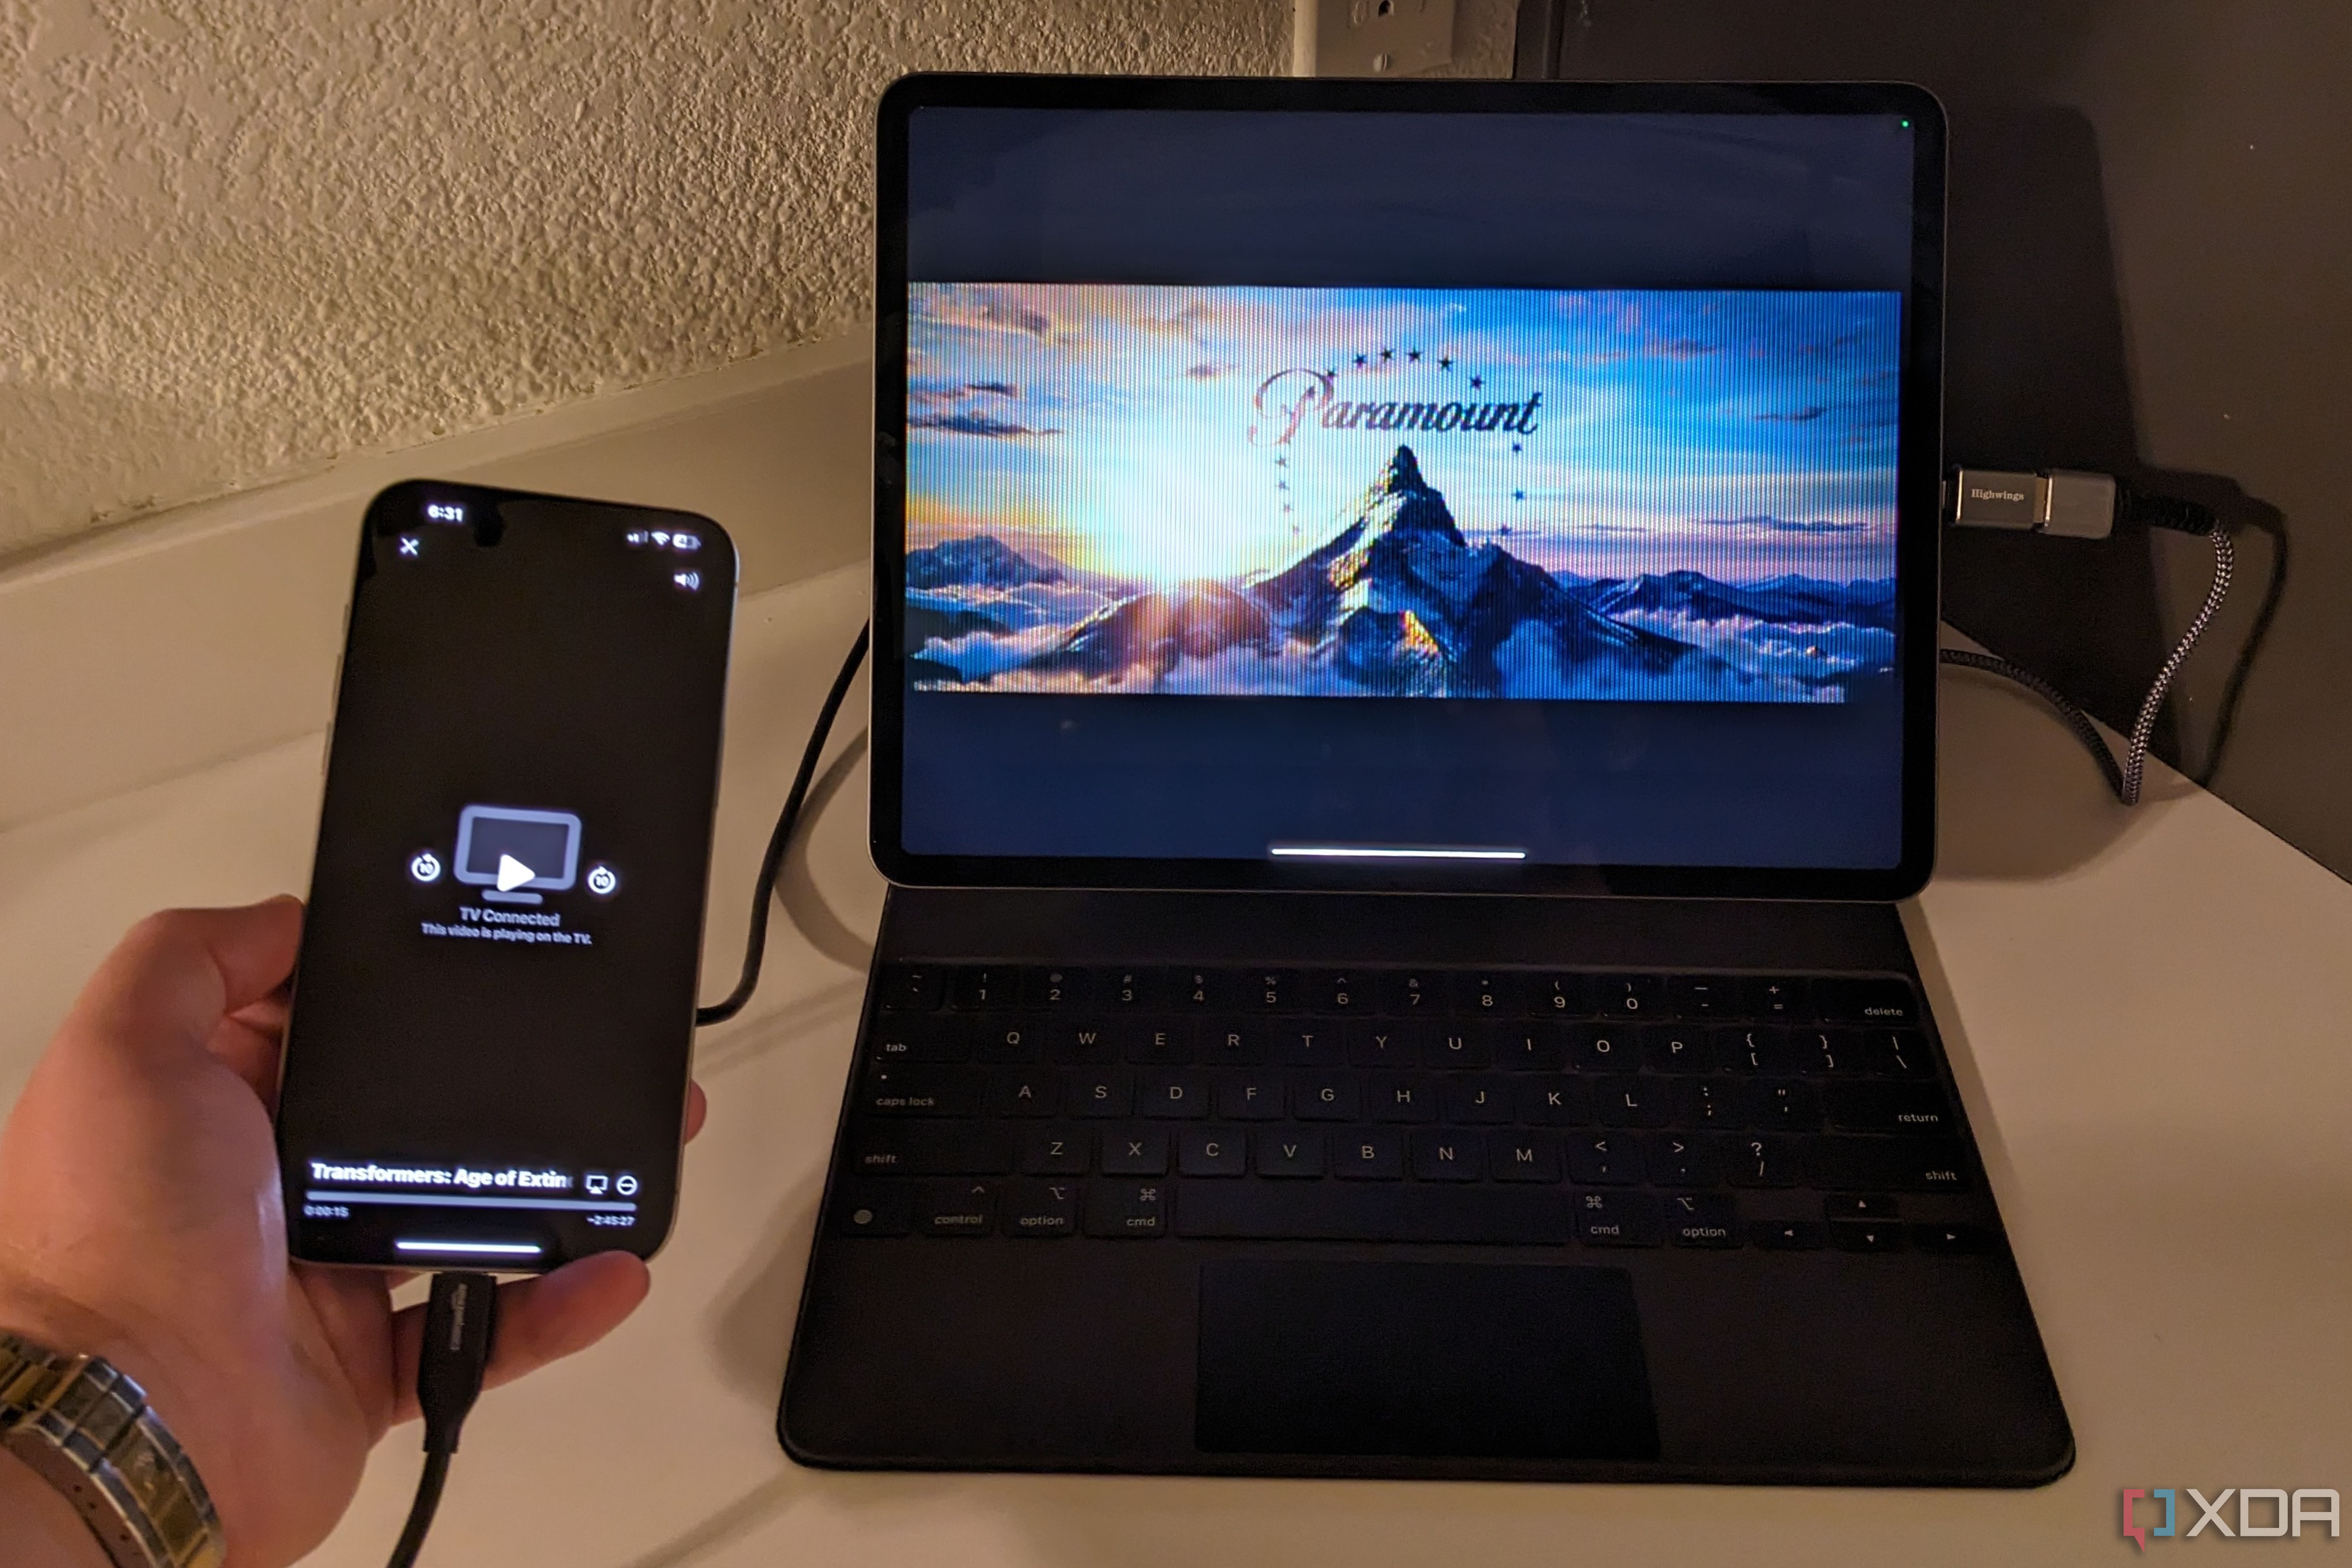 I connected my iPhone to my iPad using Orion.